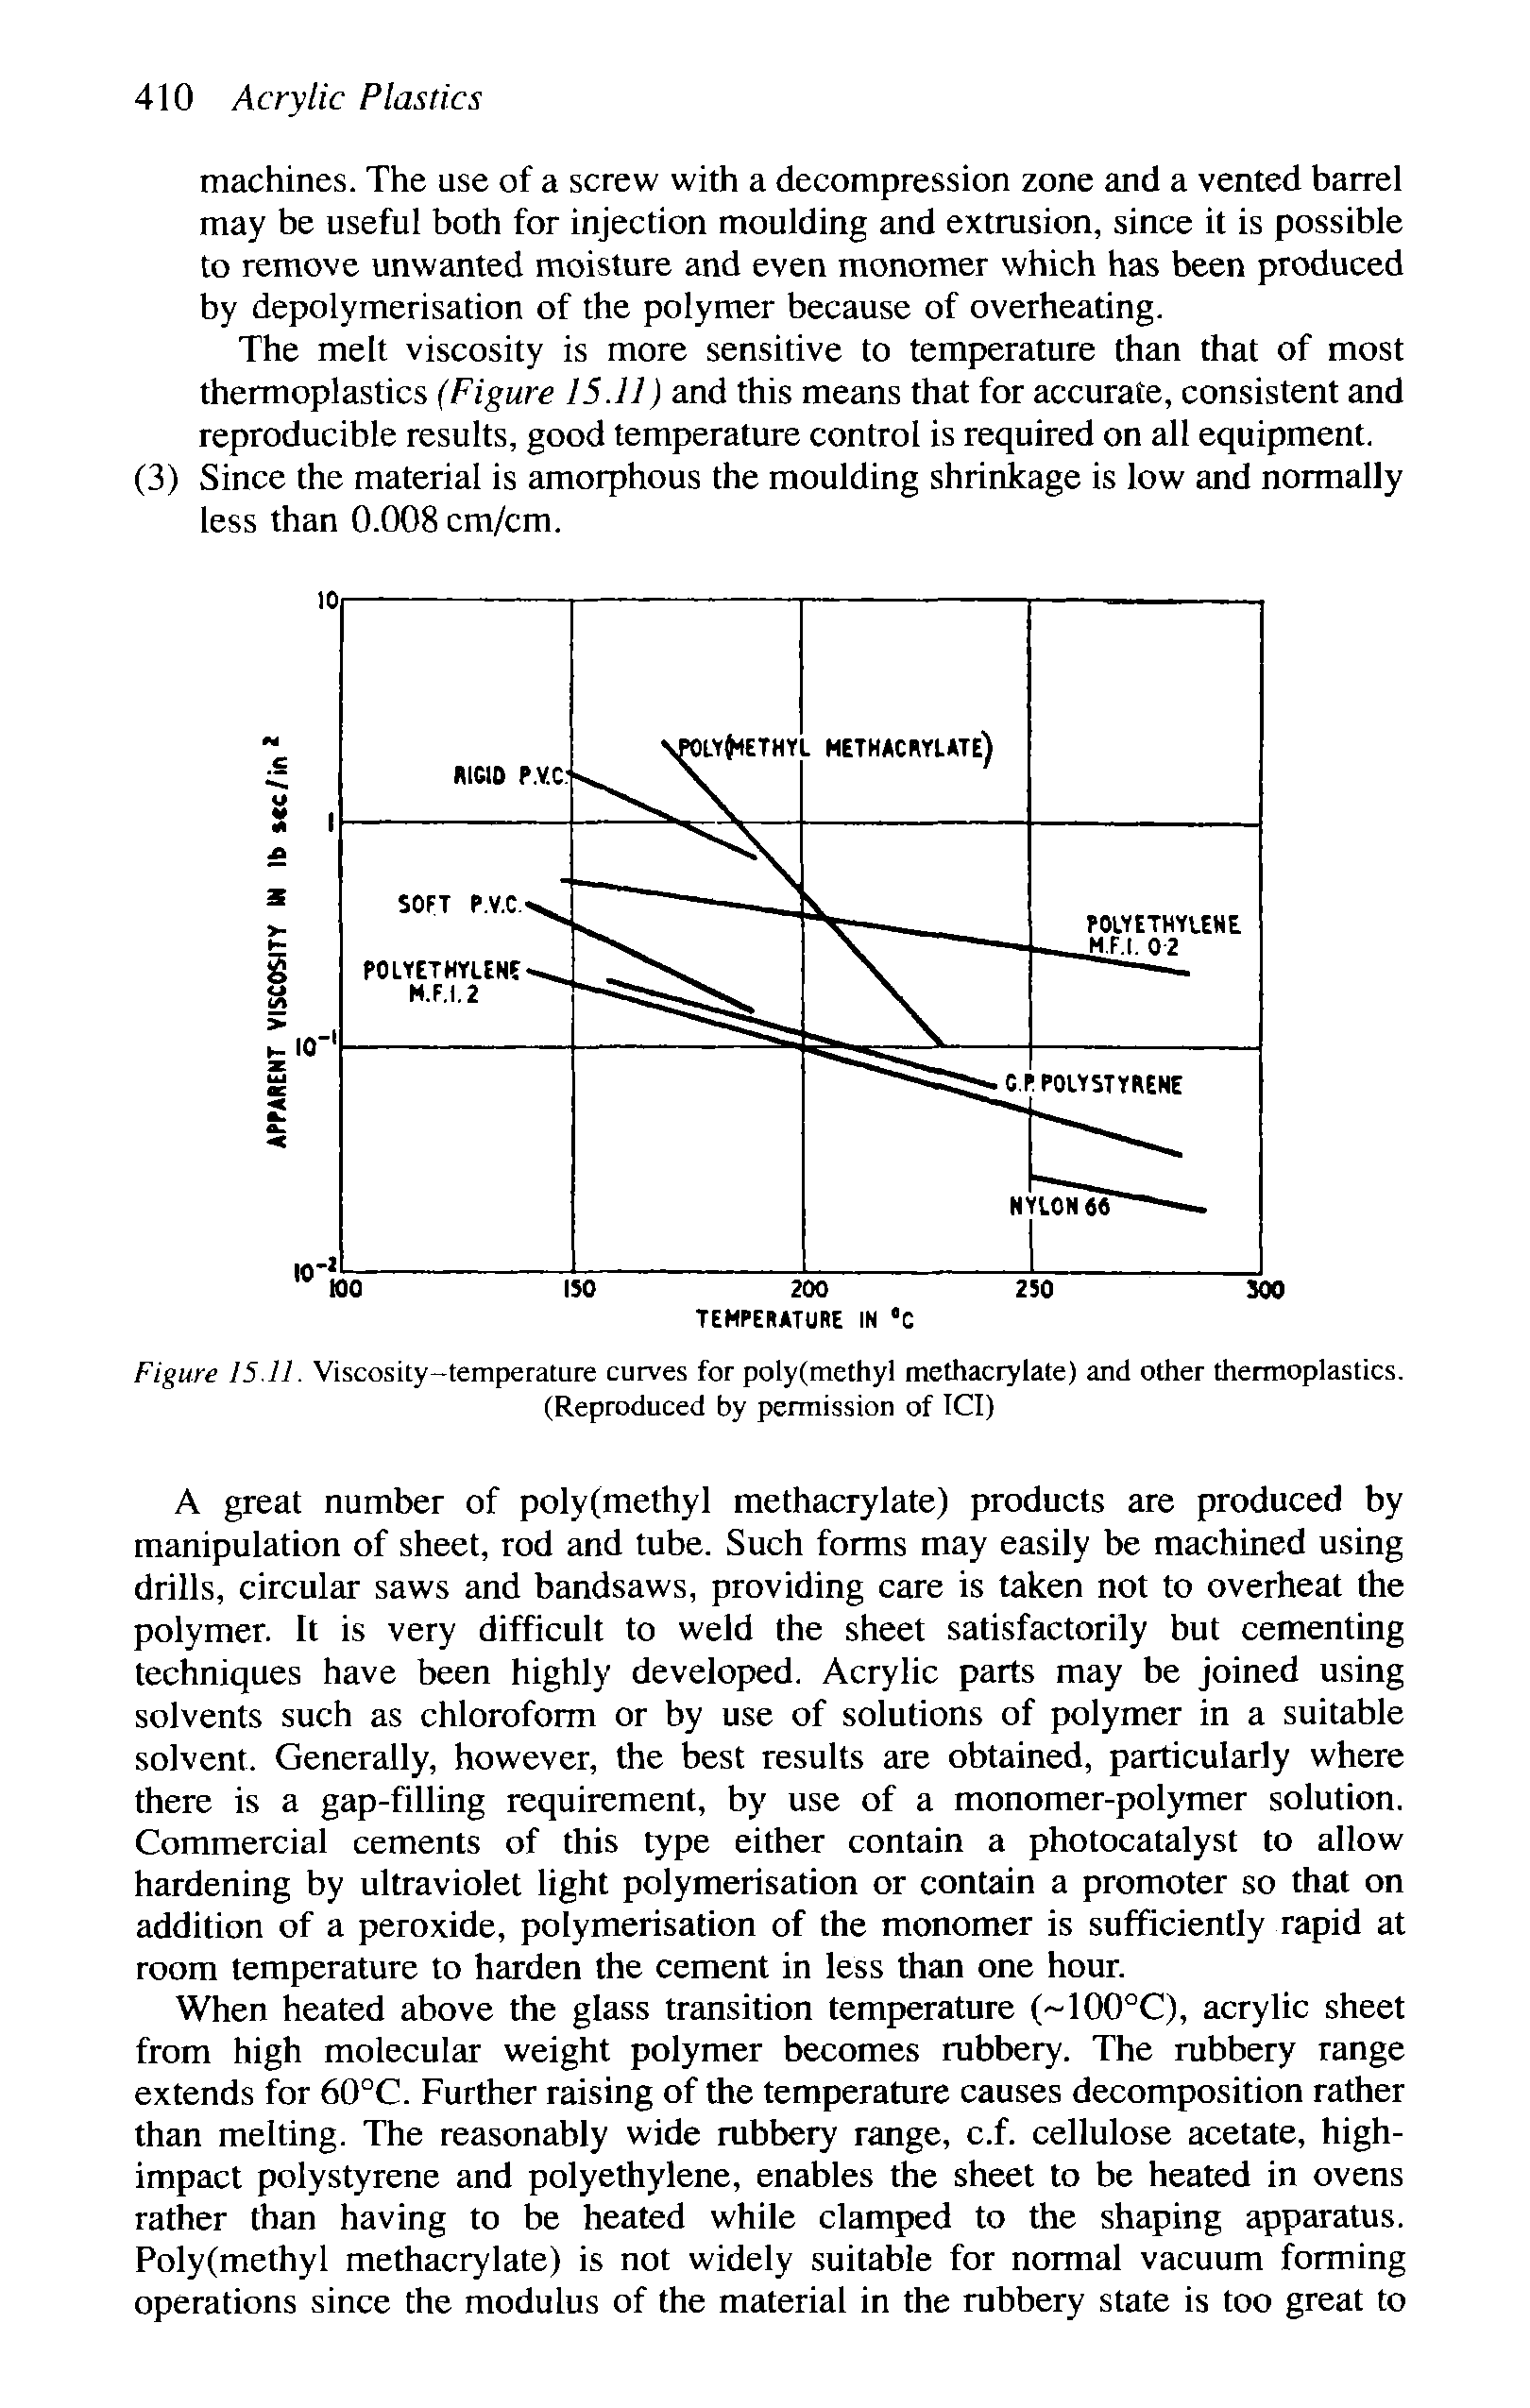 Figure 15.11. Viscosity-temperature curves for poly(methyl methacrylate) and other thermoplastics. (Reproduced by permission of ICI)...